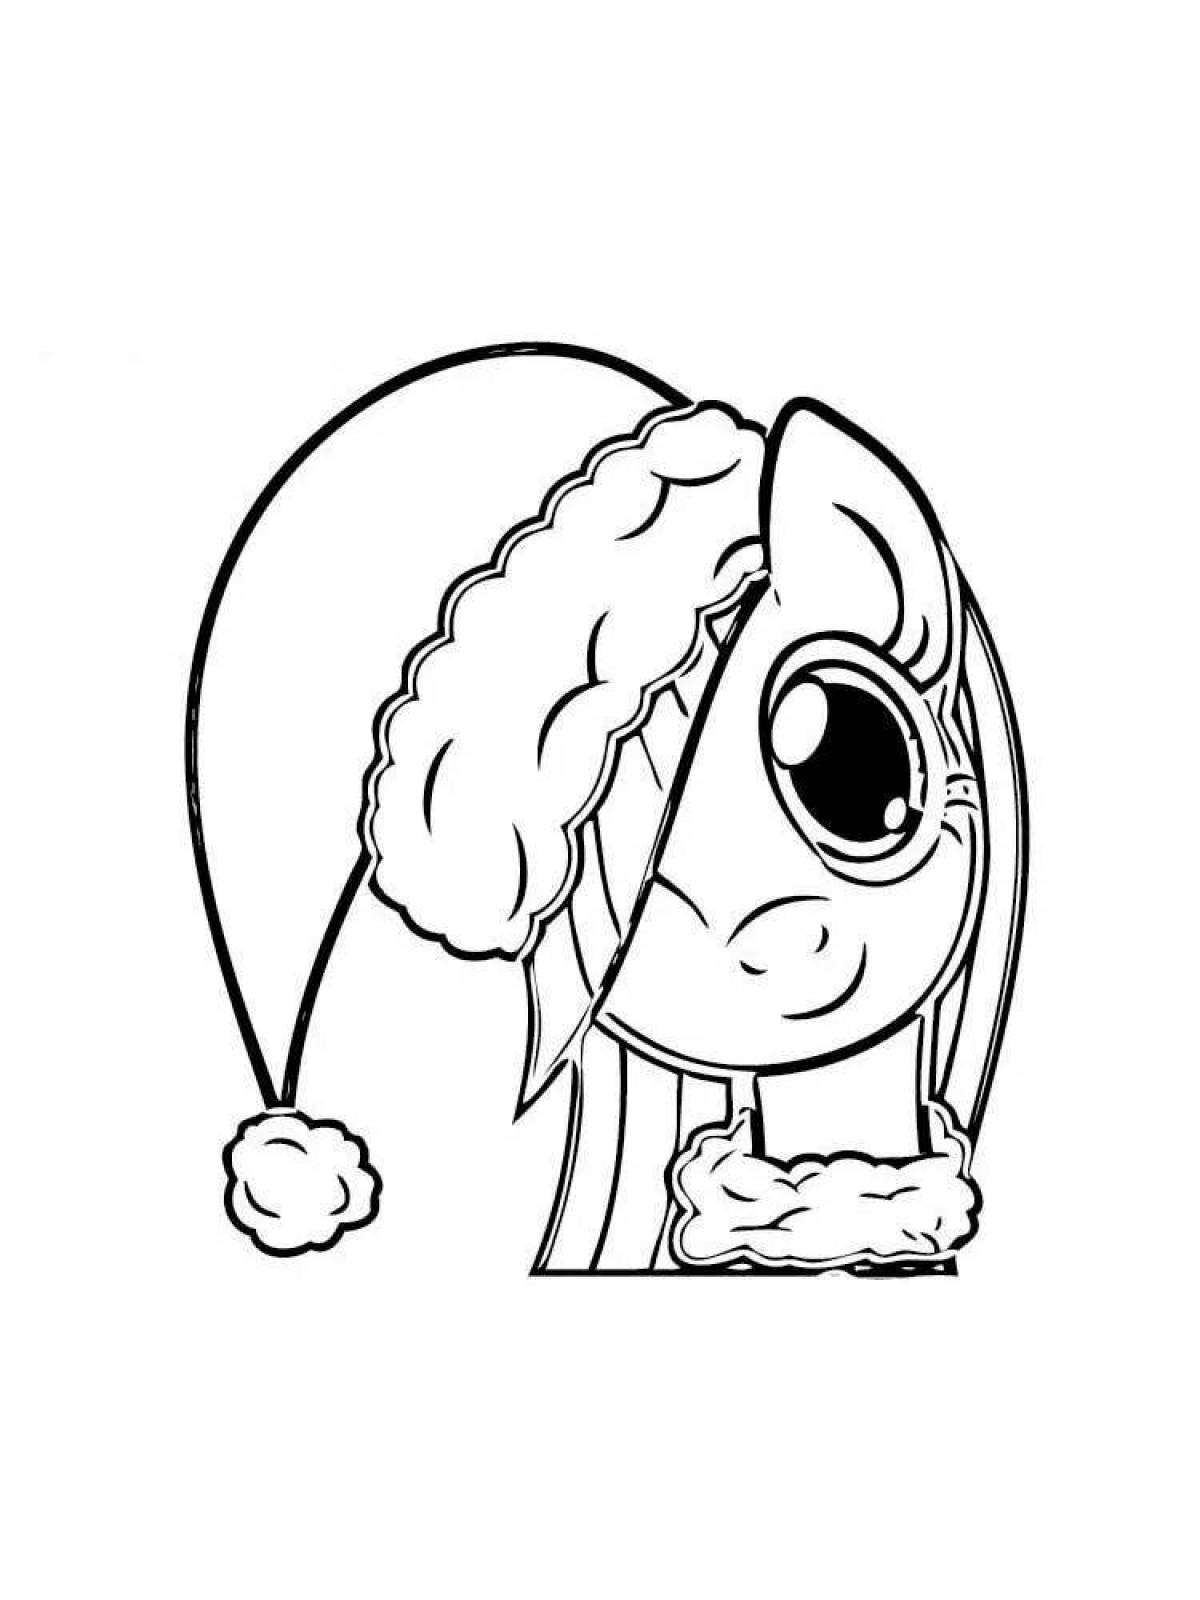 Adorable Christmas ponies coloring page